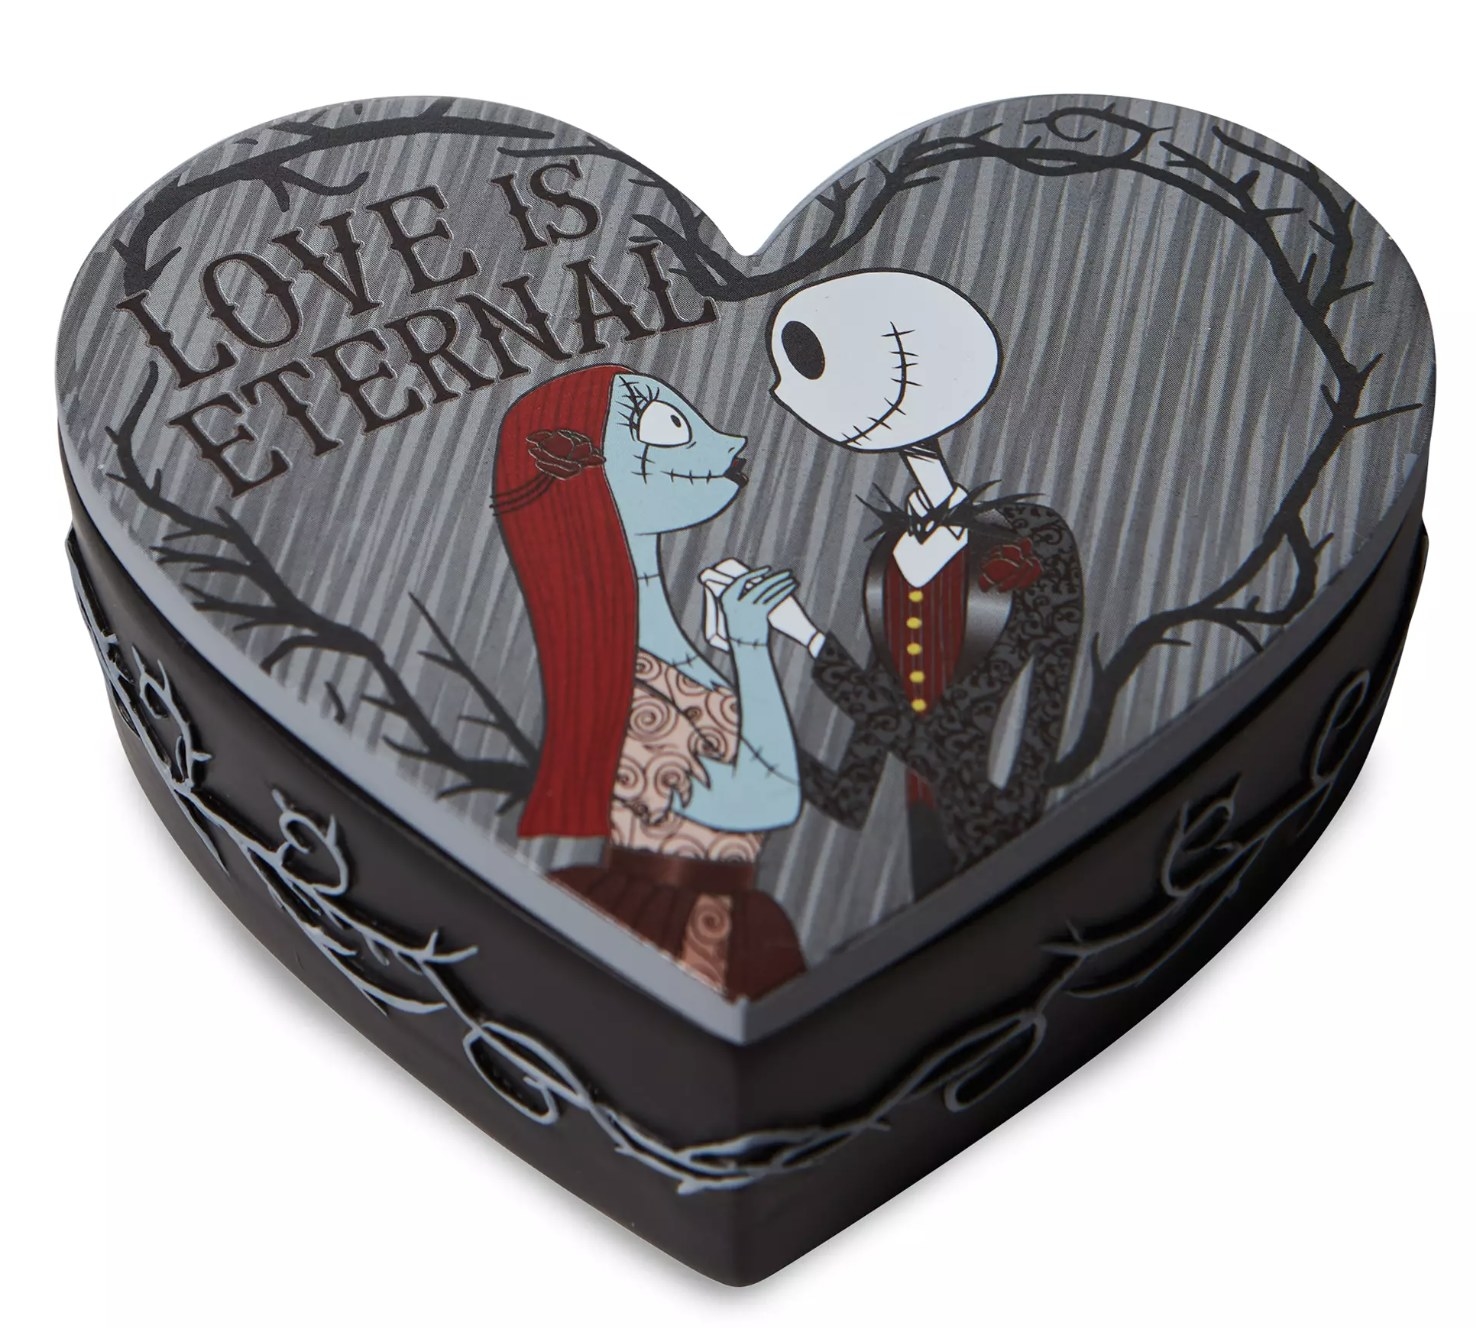 The heart-shapred box with Jack Skellington and Salley and words &quot;Love is eternal&quot;